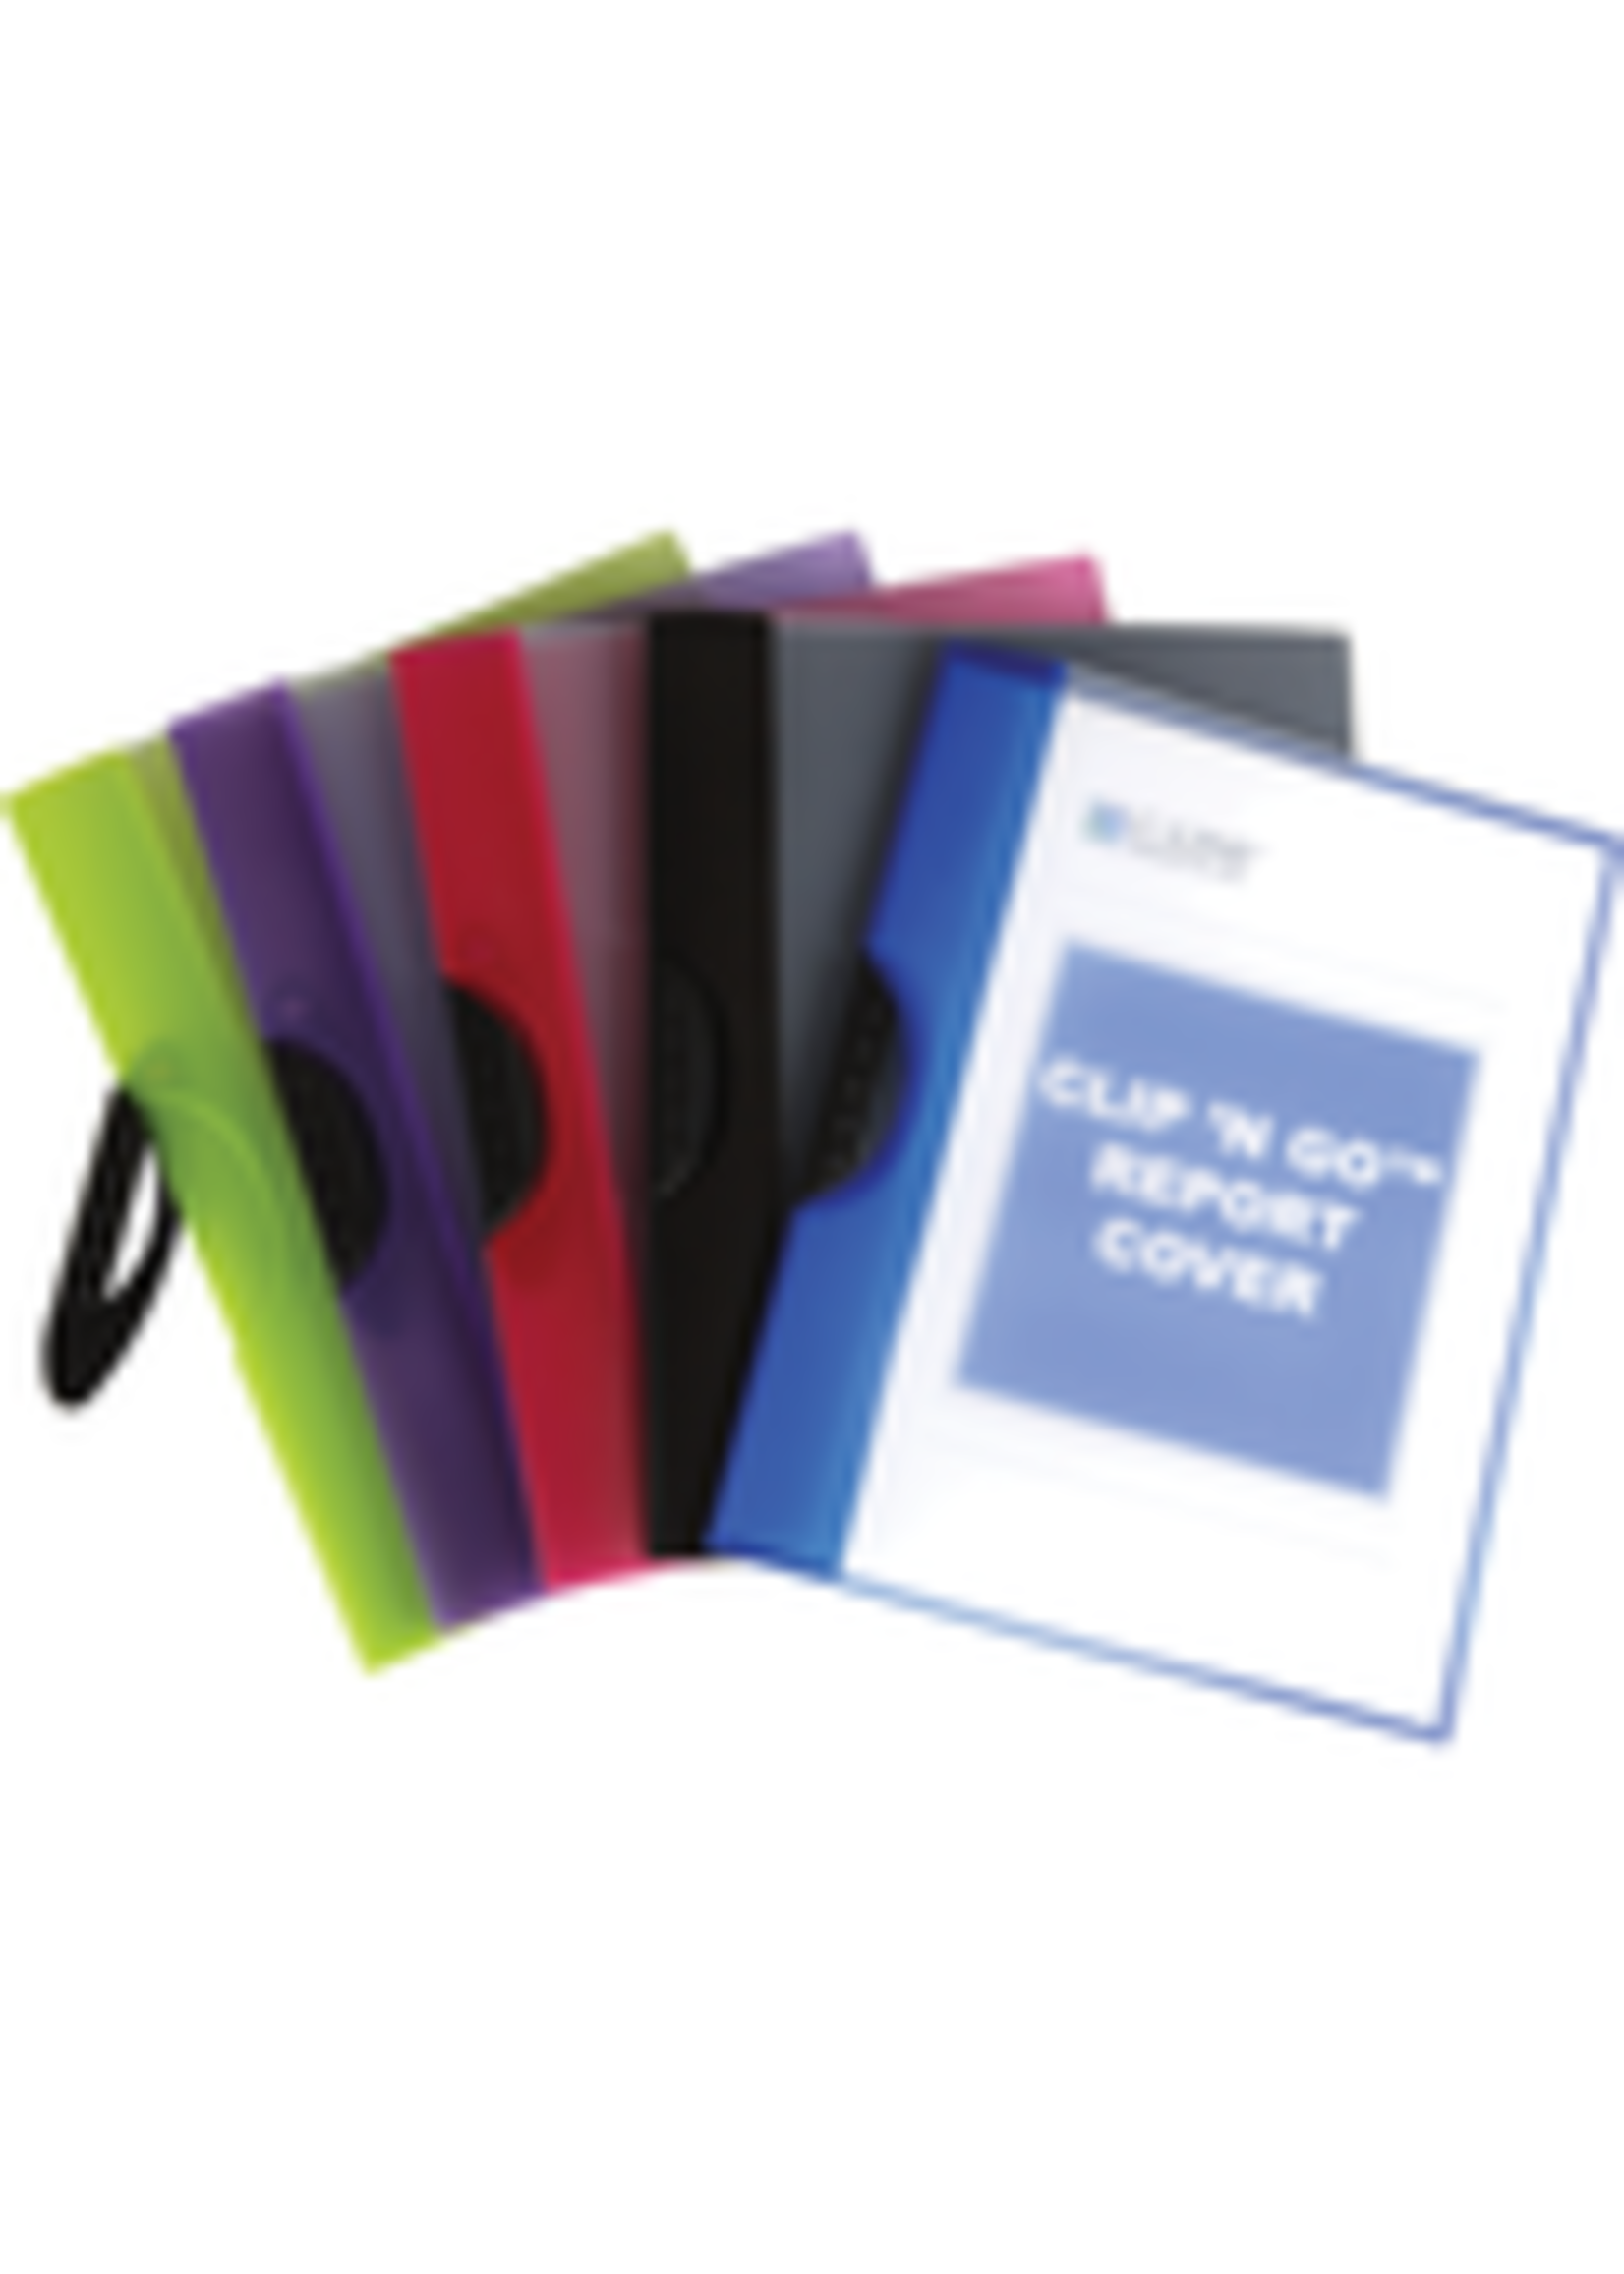 C-Line C-Line Clip N Go Report Cover (Assorted Colors) sold separately